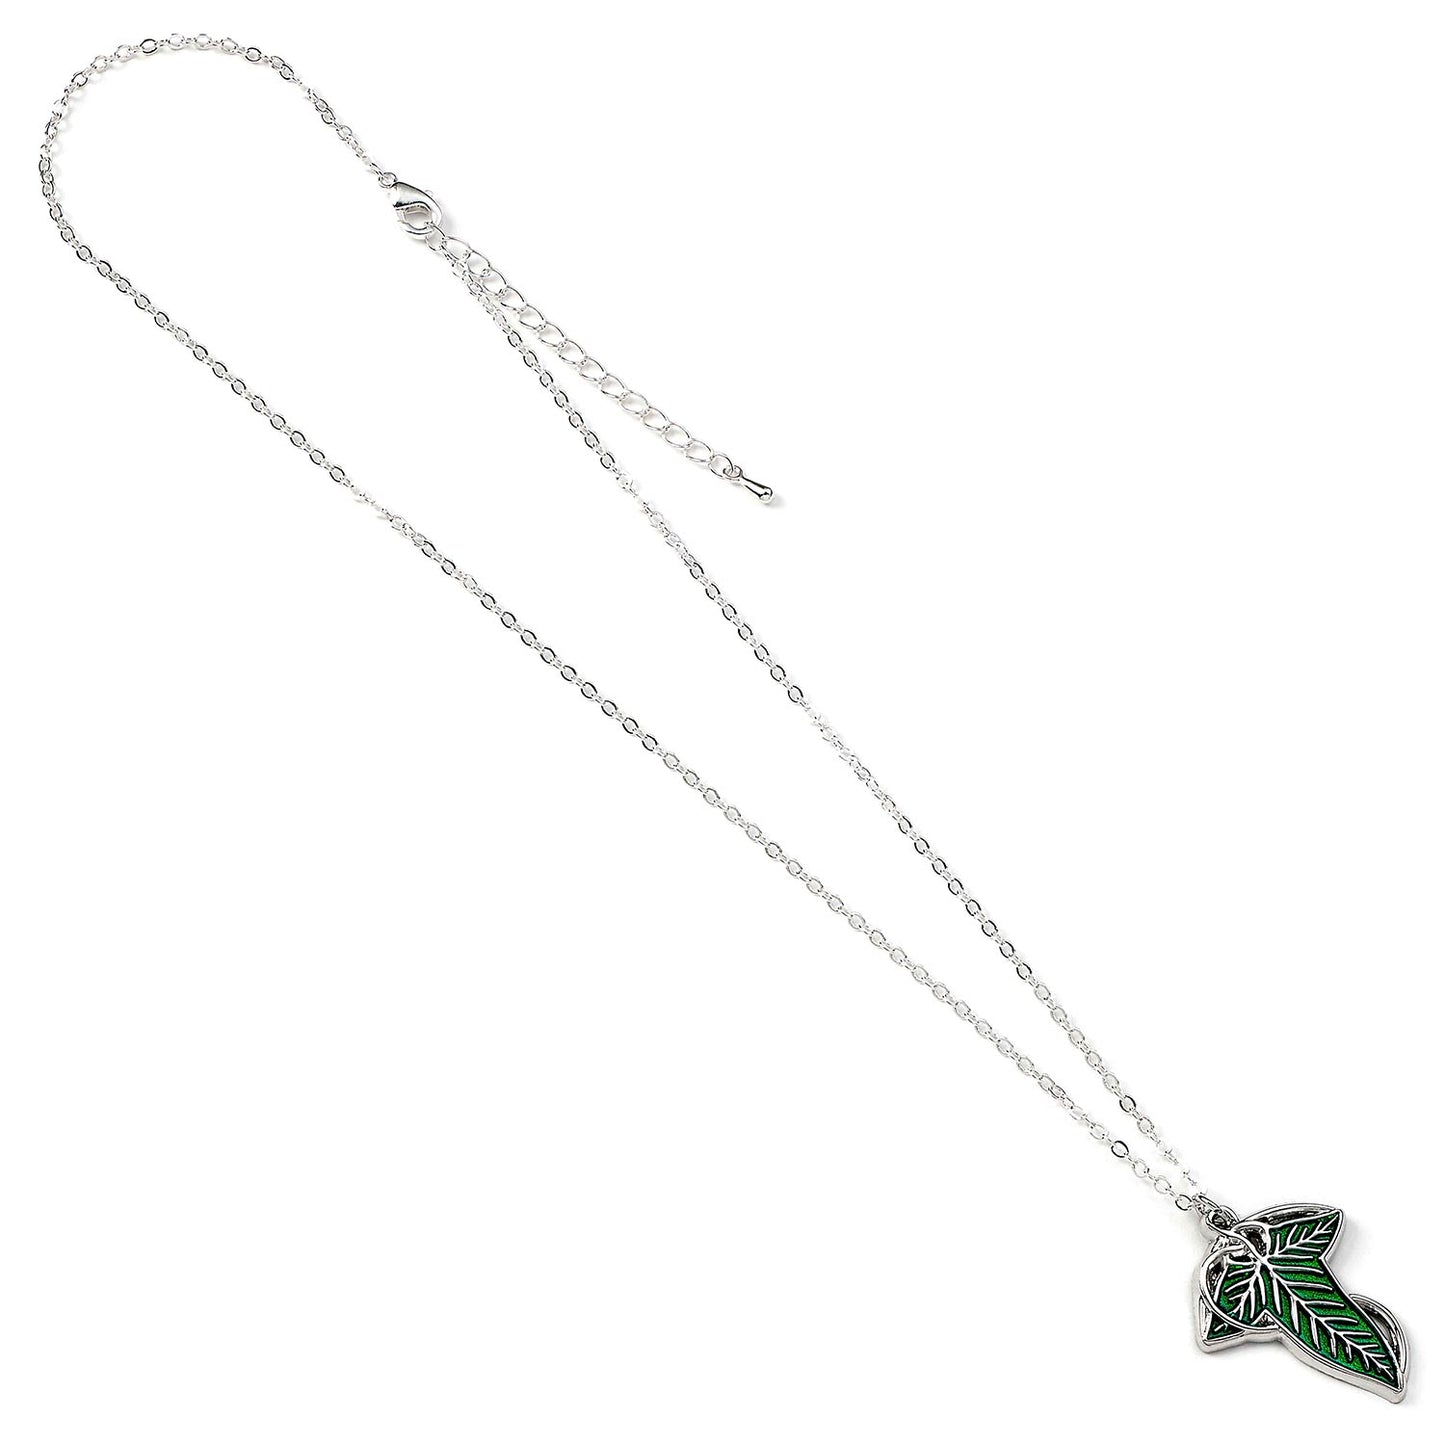 Necklace - The Lord of The Rings - Official - The Leaf of Lorien